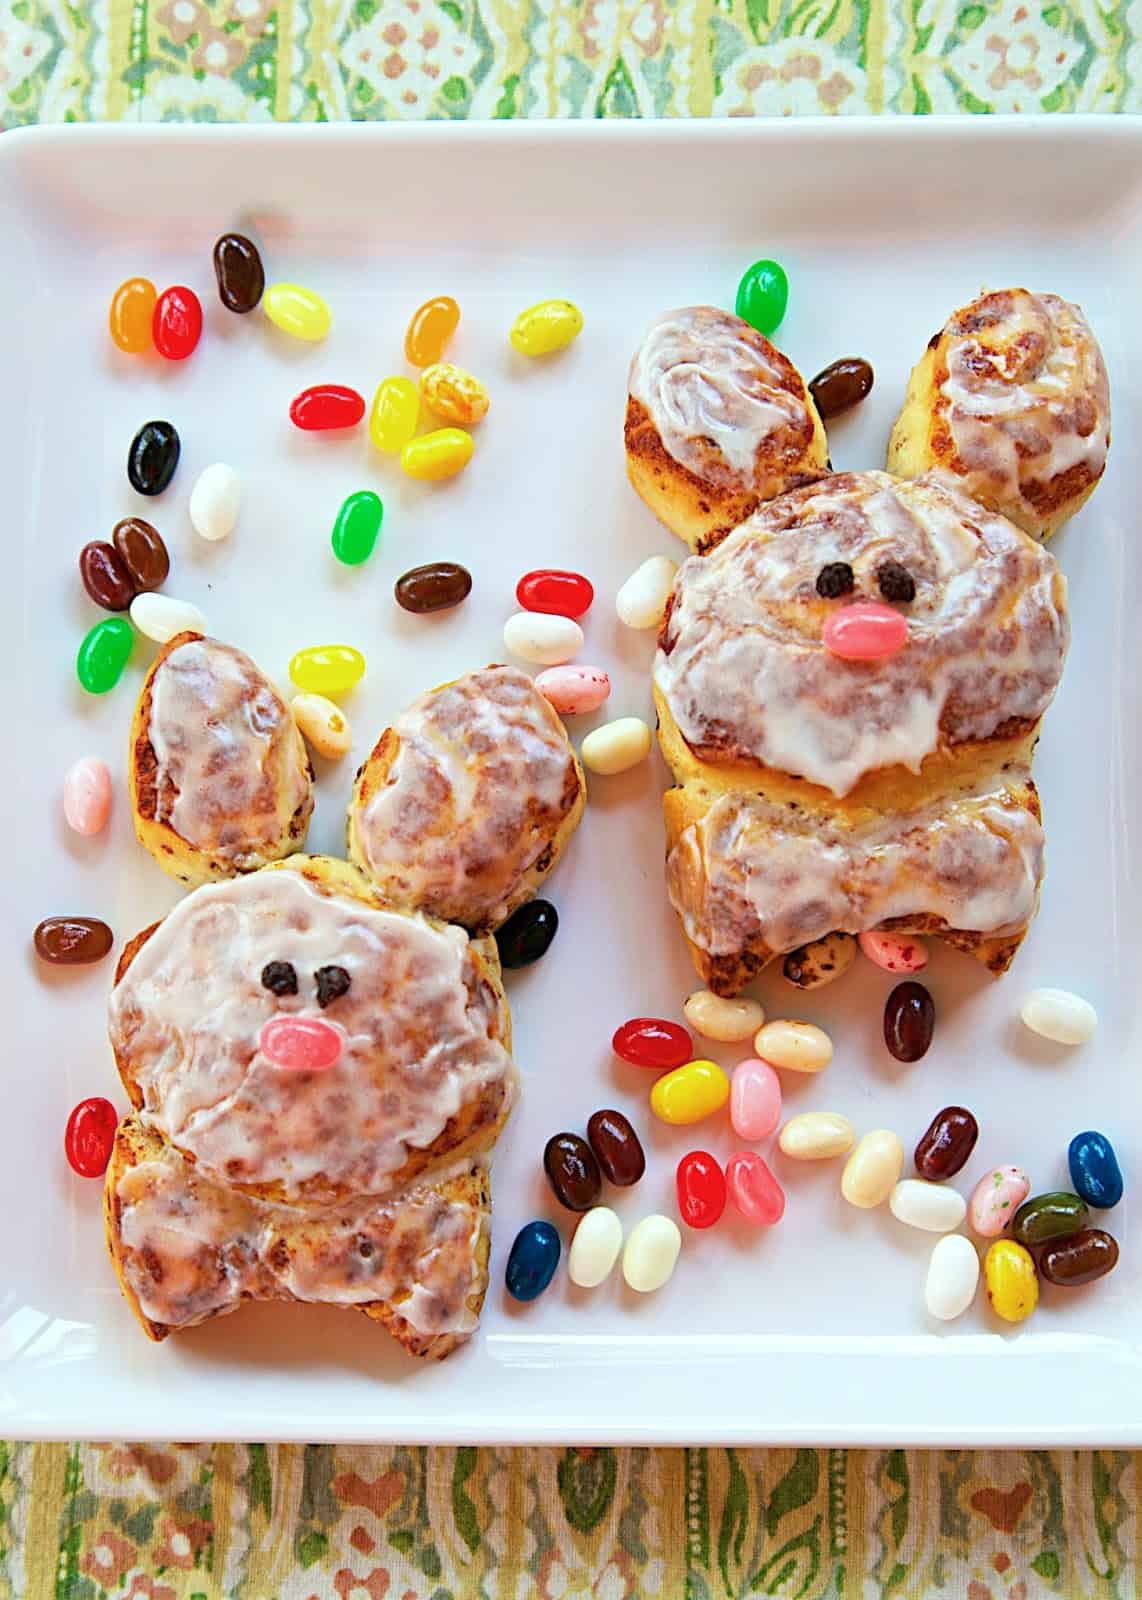 Cinnabunnies Recipe - refrigerated cinnamon rolls cut out in the shape of an Easter bunny. The perfect Easter morning treat!